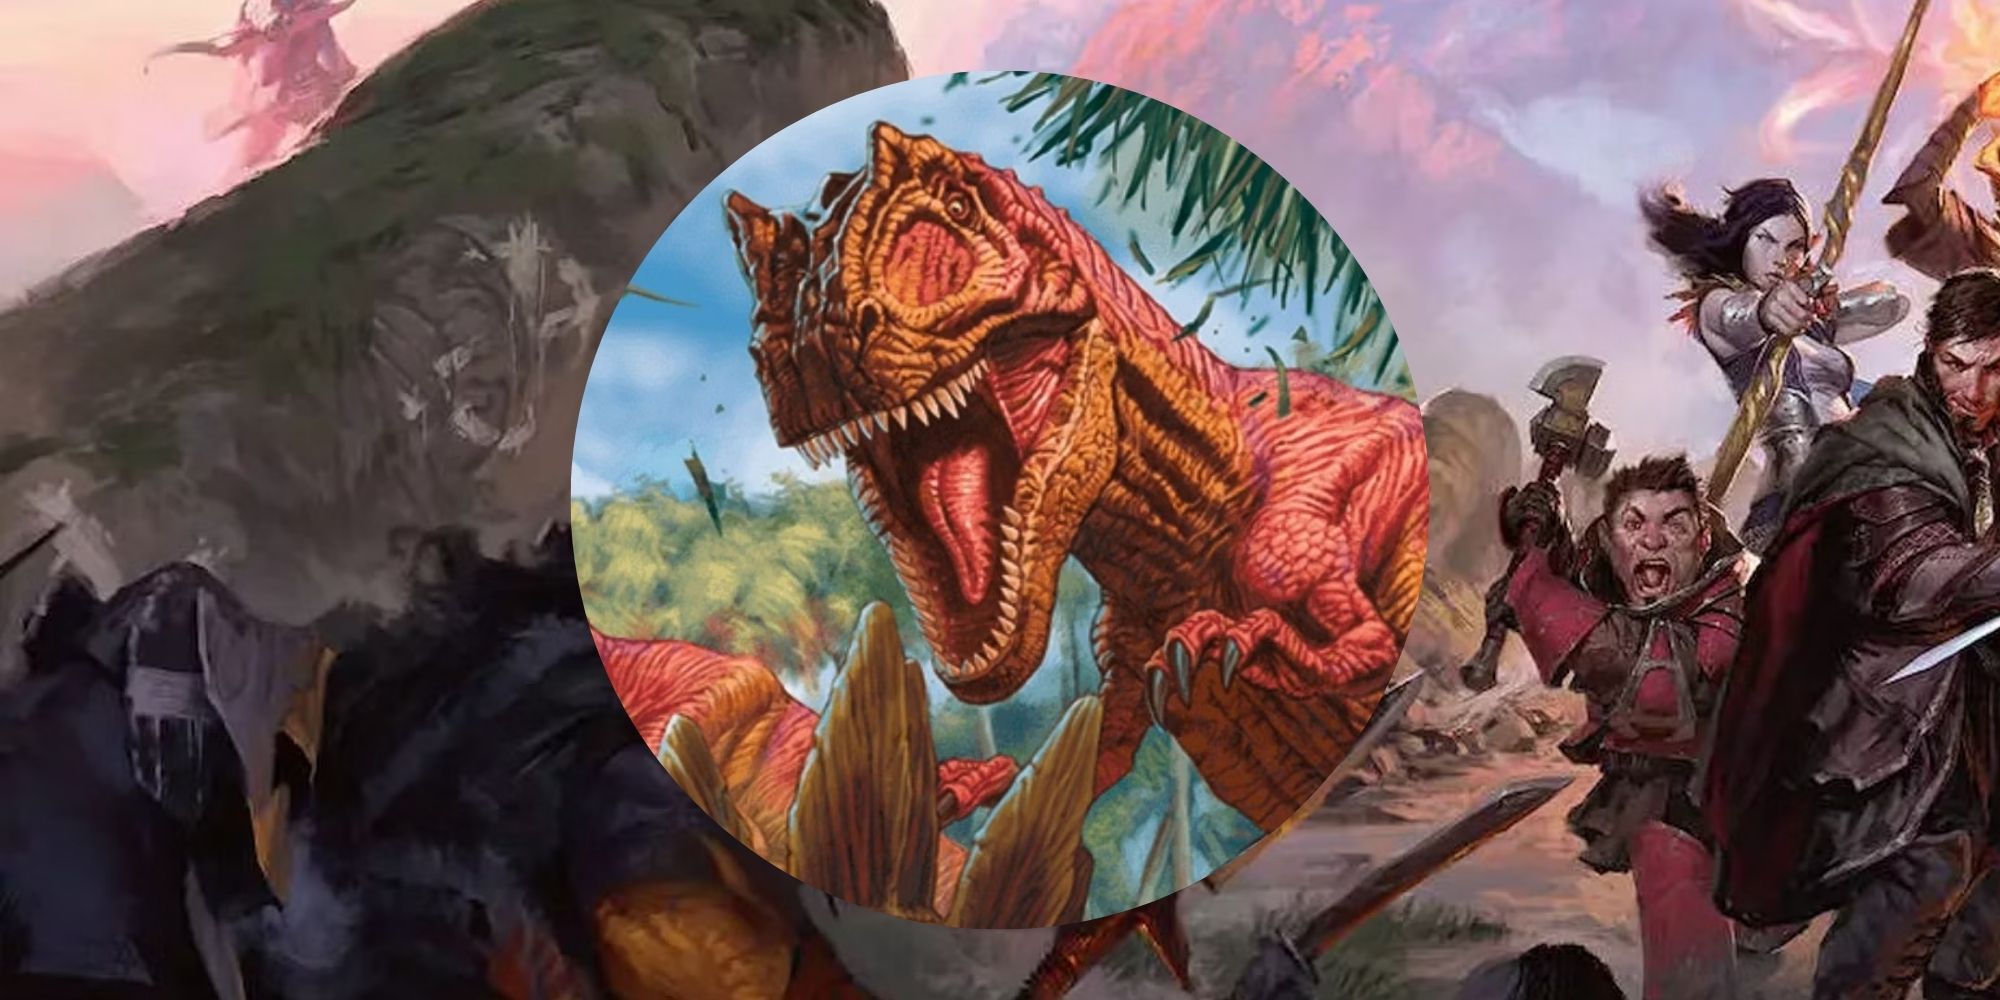 Dungeons & Dragons dinosaur roaring from center of image over D&D cover